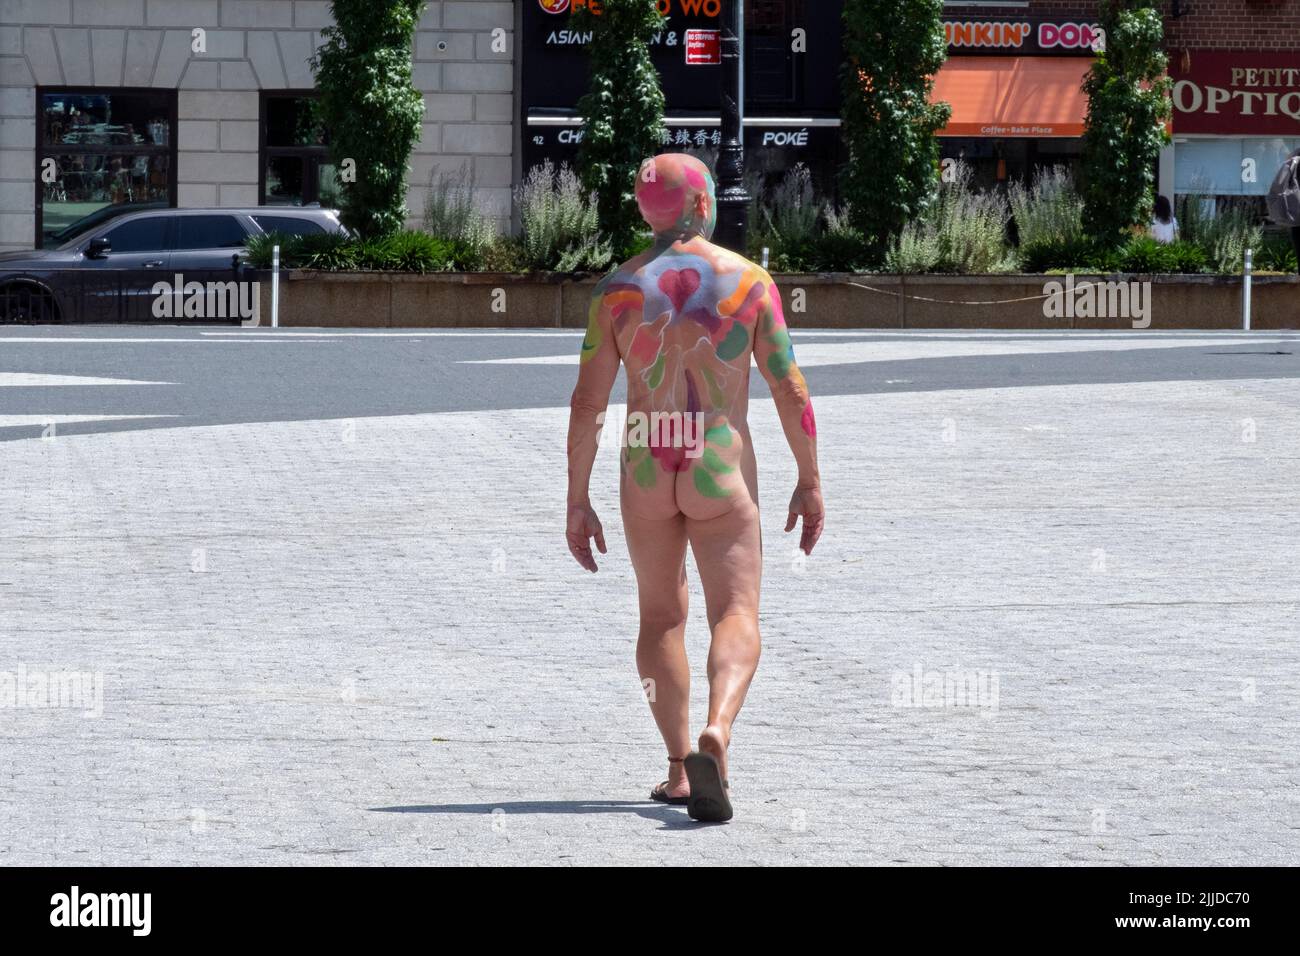 An unidentifiable man in his sixties after being painted at NYC Body Painting Day in Union Square Park in Lower Manhattan, New York. Stock Photo